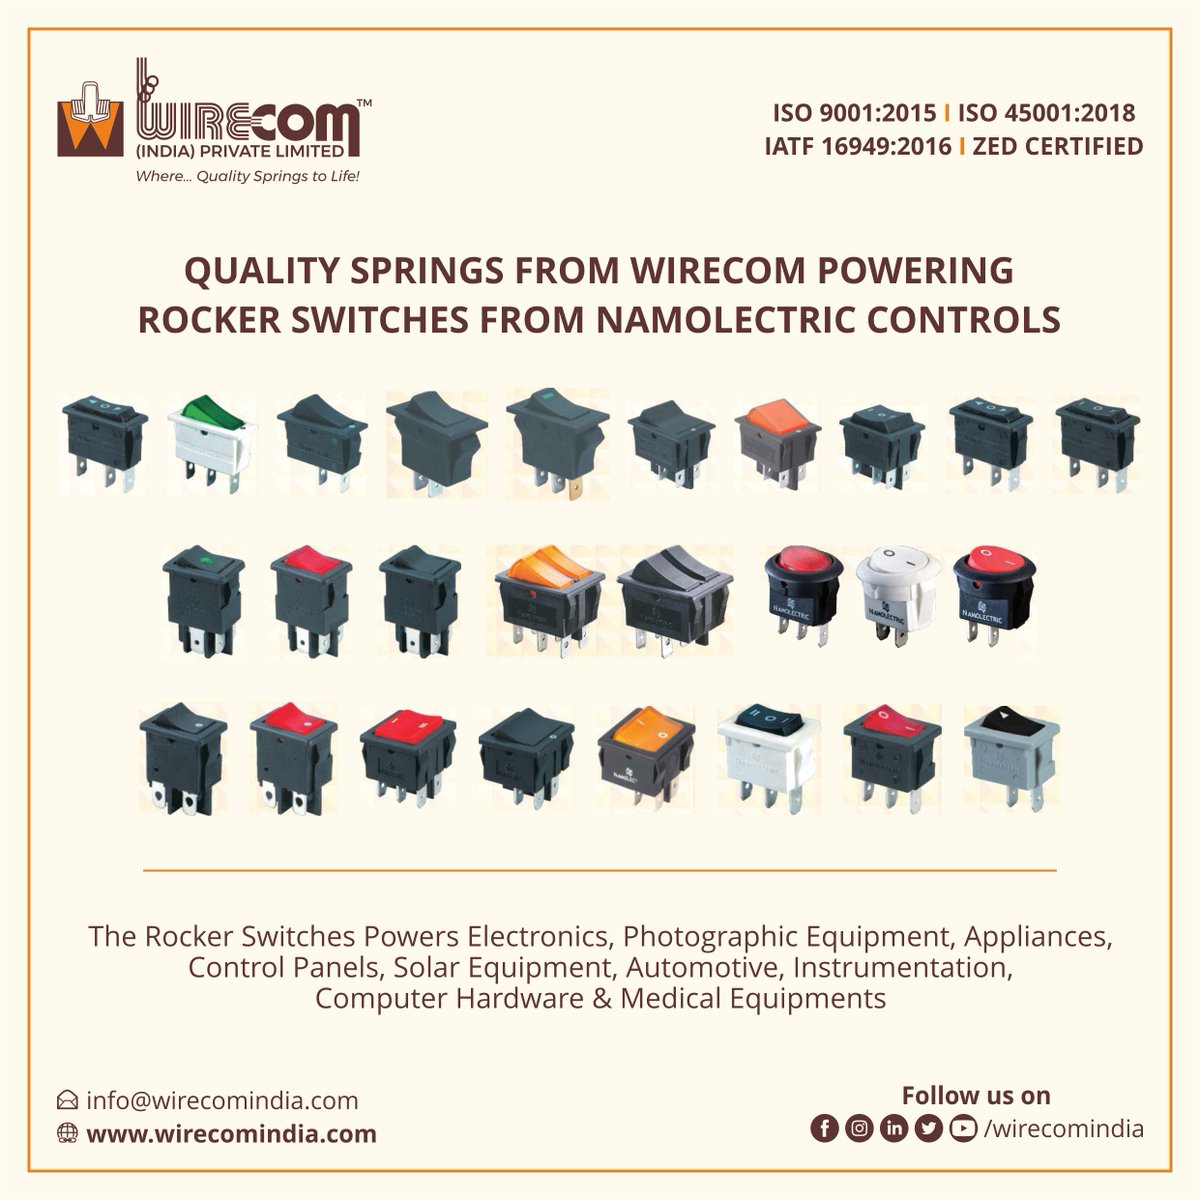 Spring is responsible for making the connections by pressing the contacts through the spring force thereby making the switch ON and OFF.

@WirecomIndia has been powering Namolectric Controls Rocker Switches

#rockerswitches #switches #switch #spring #mumbai #vasai #pune